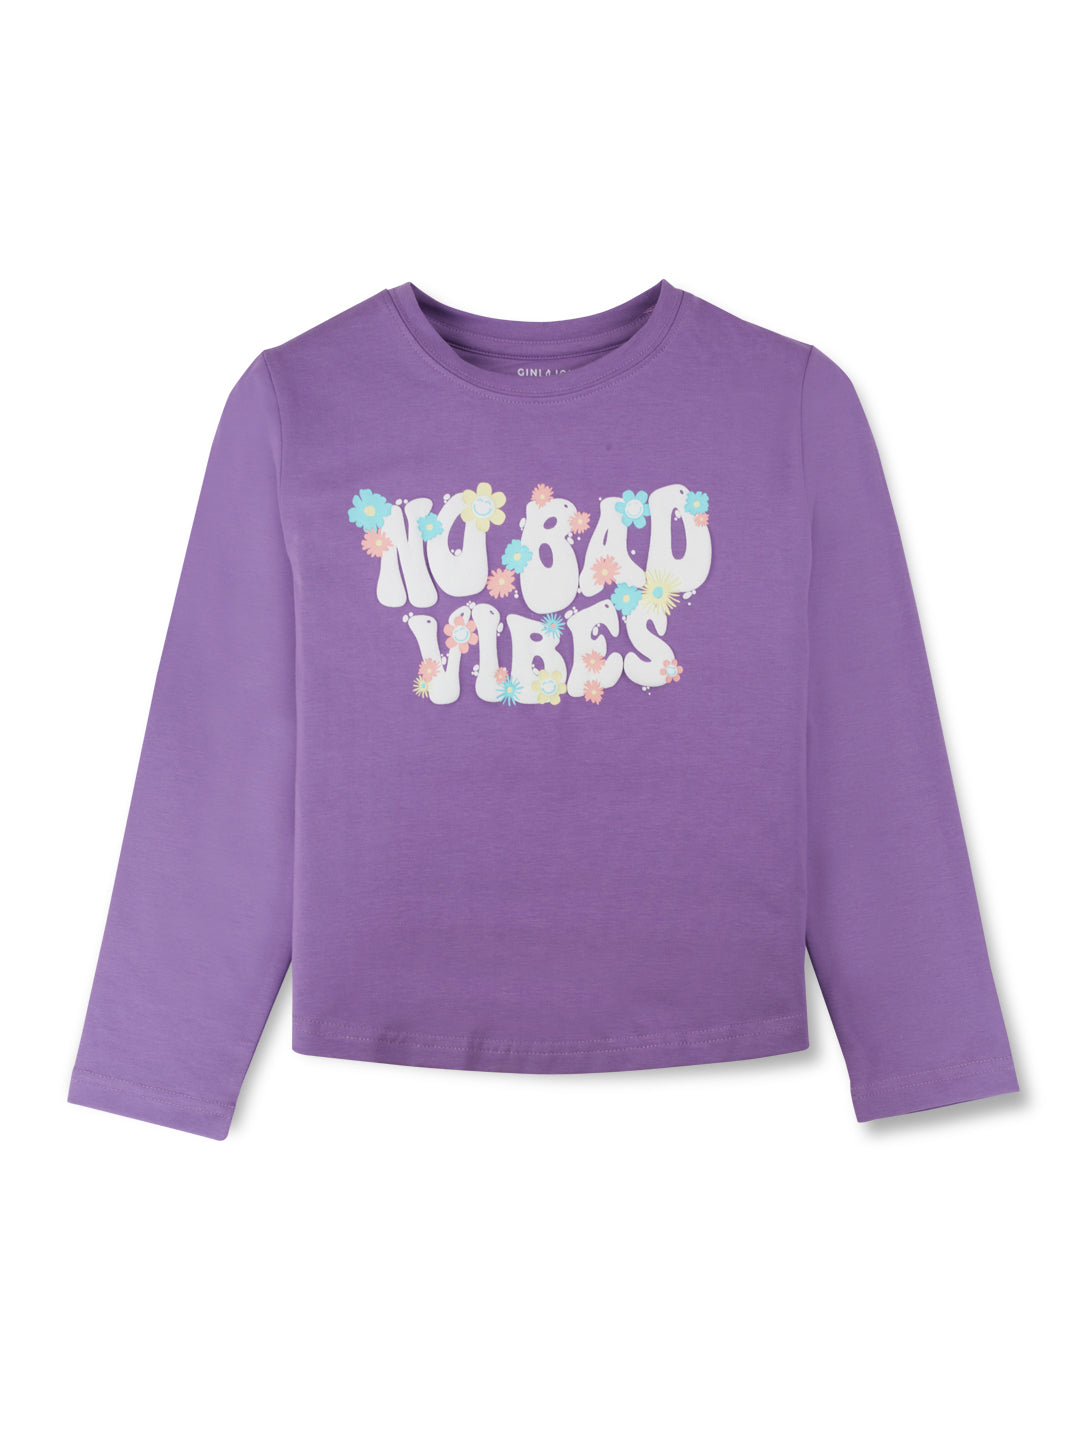 Girls purple round neck knitted cotton printed top.